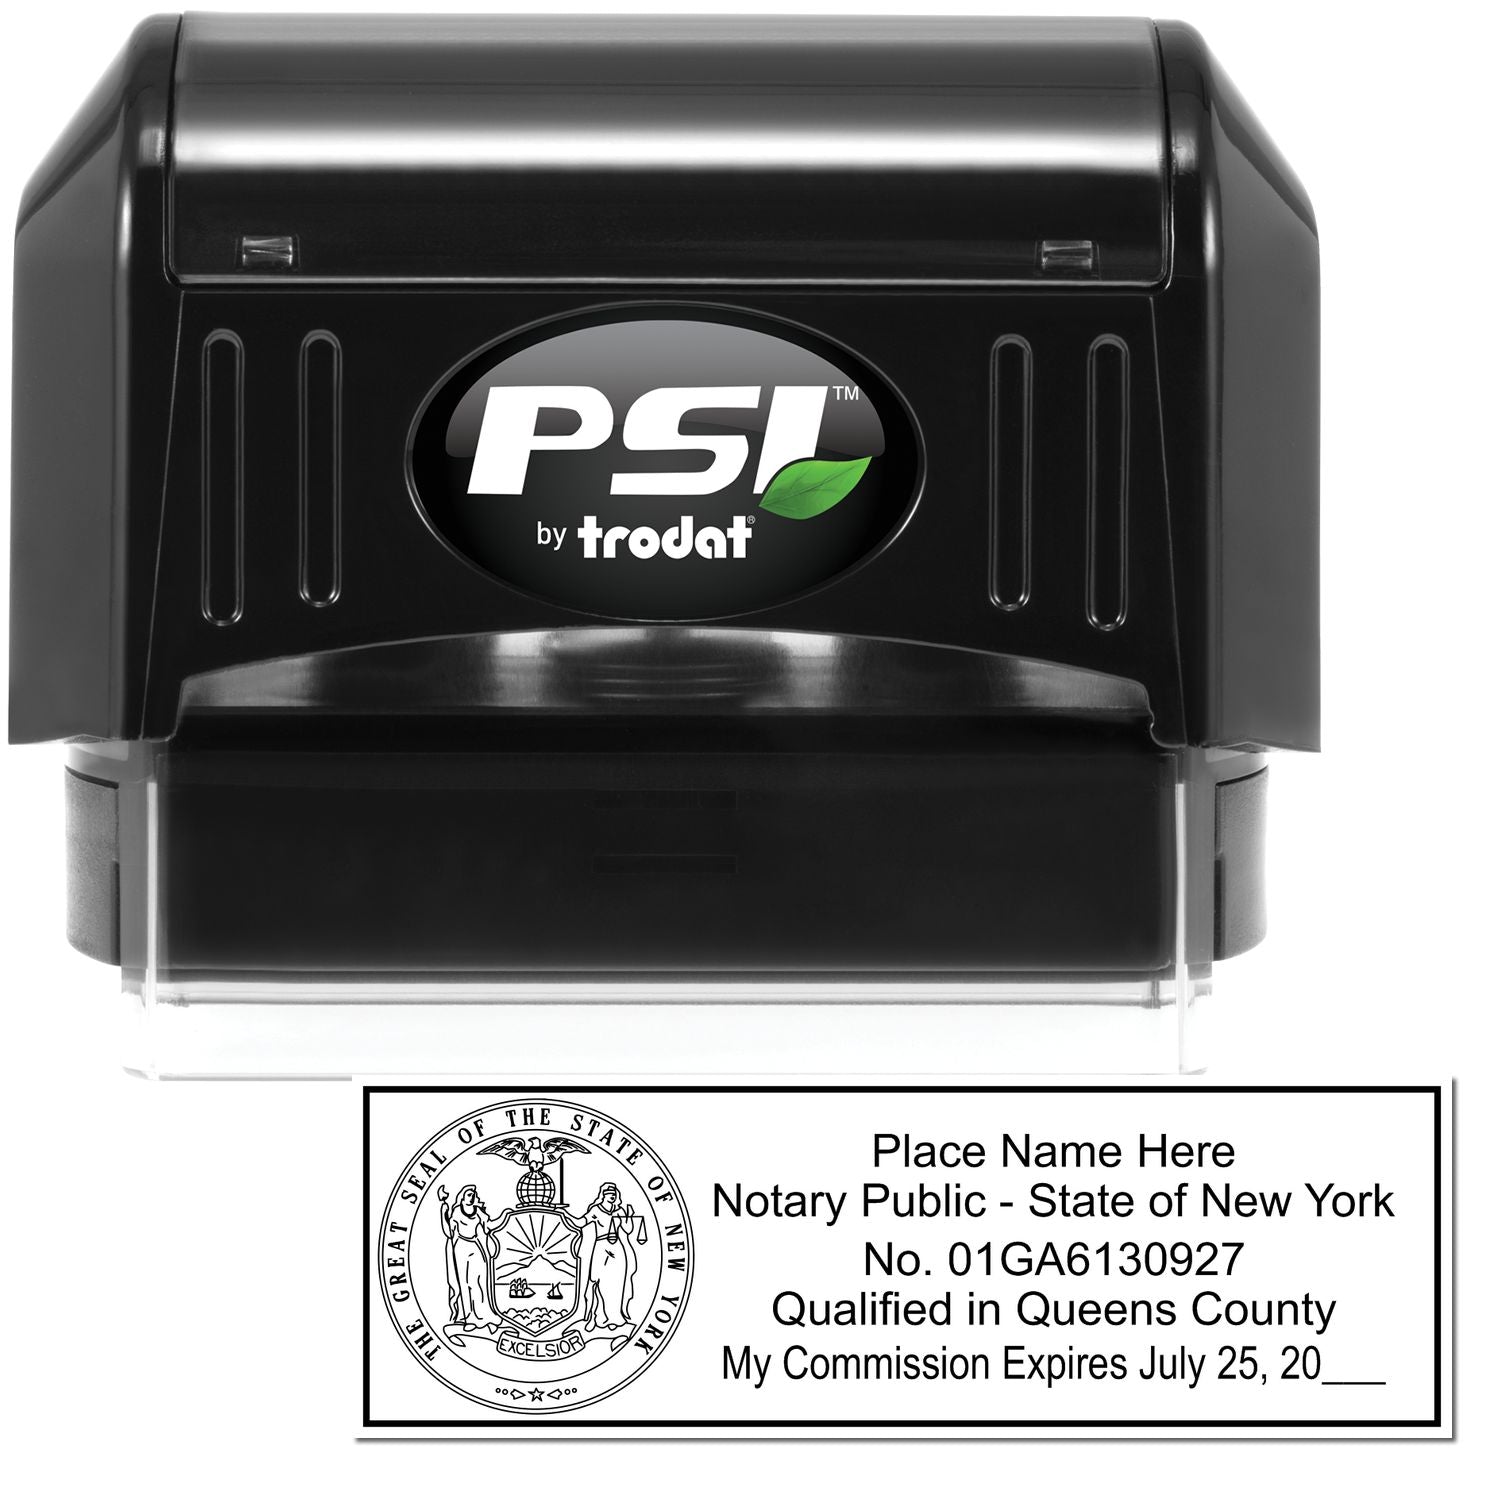 The main image for the PSI New York Notary Stamp depicting a sample of the imprint and electronic files